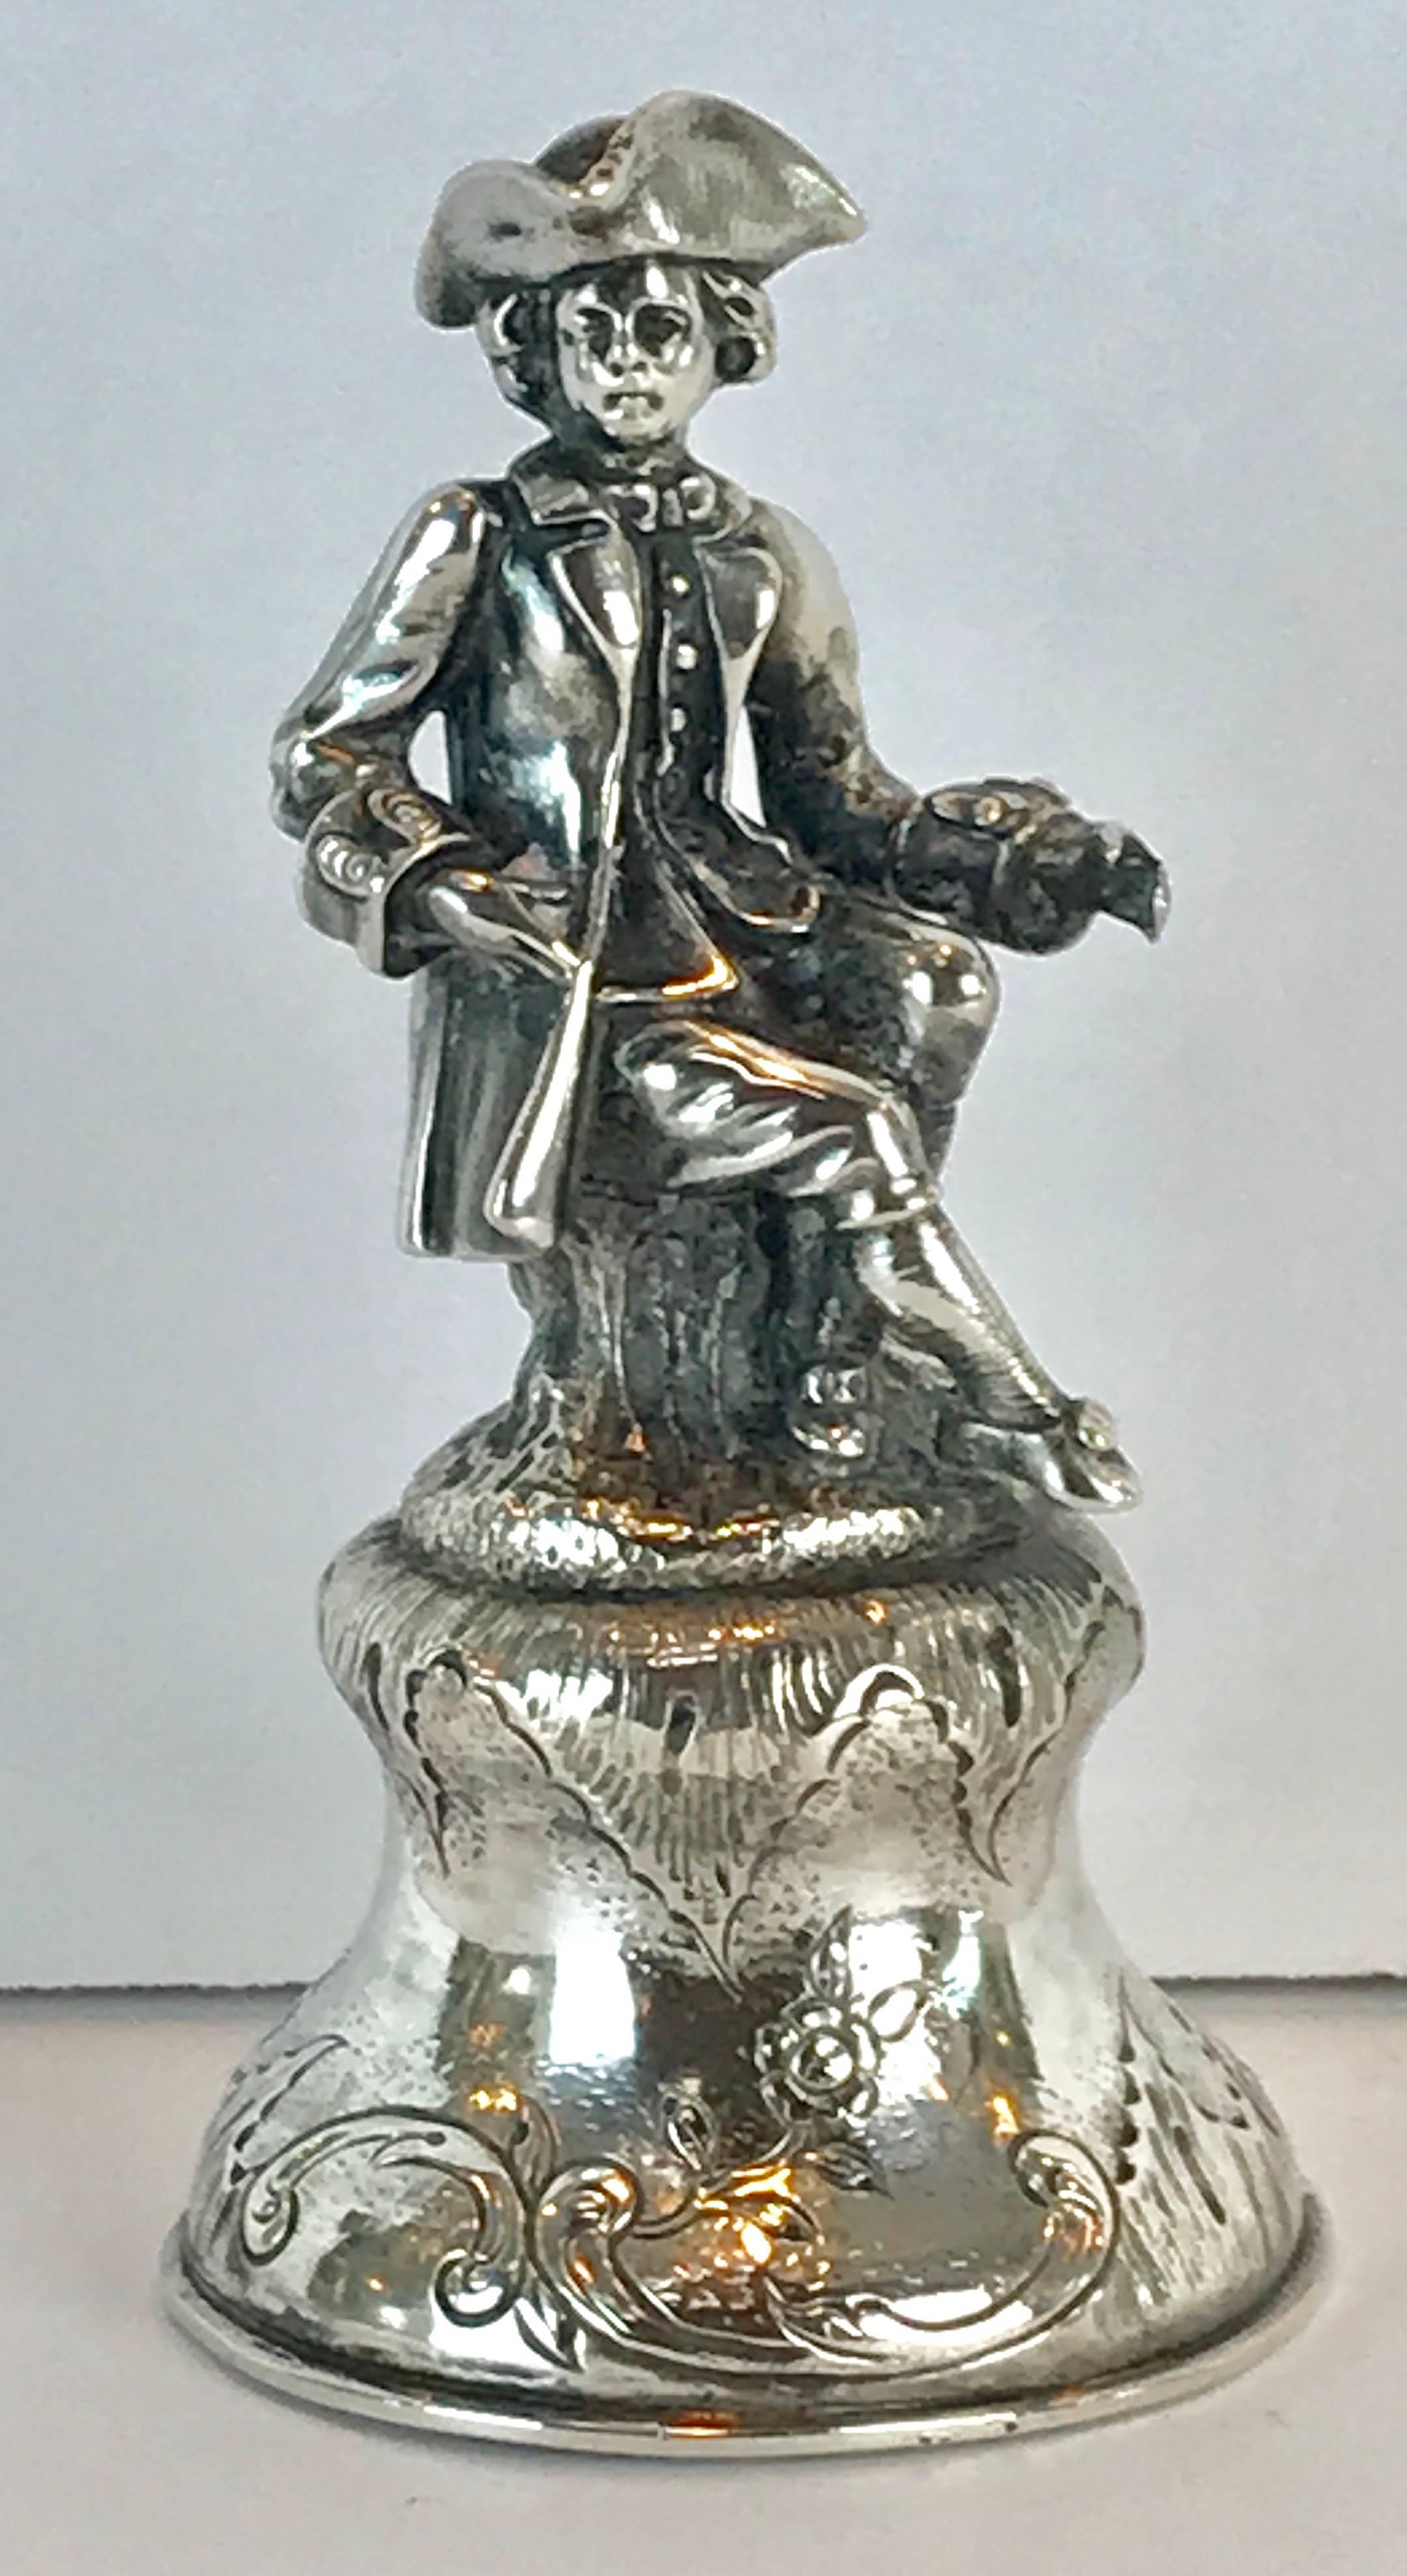 19th century continental silver figural bell, of a seated man in 18th century dress.